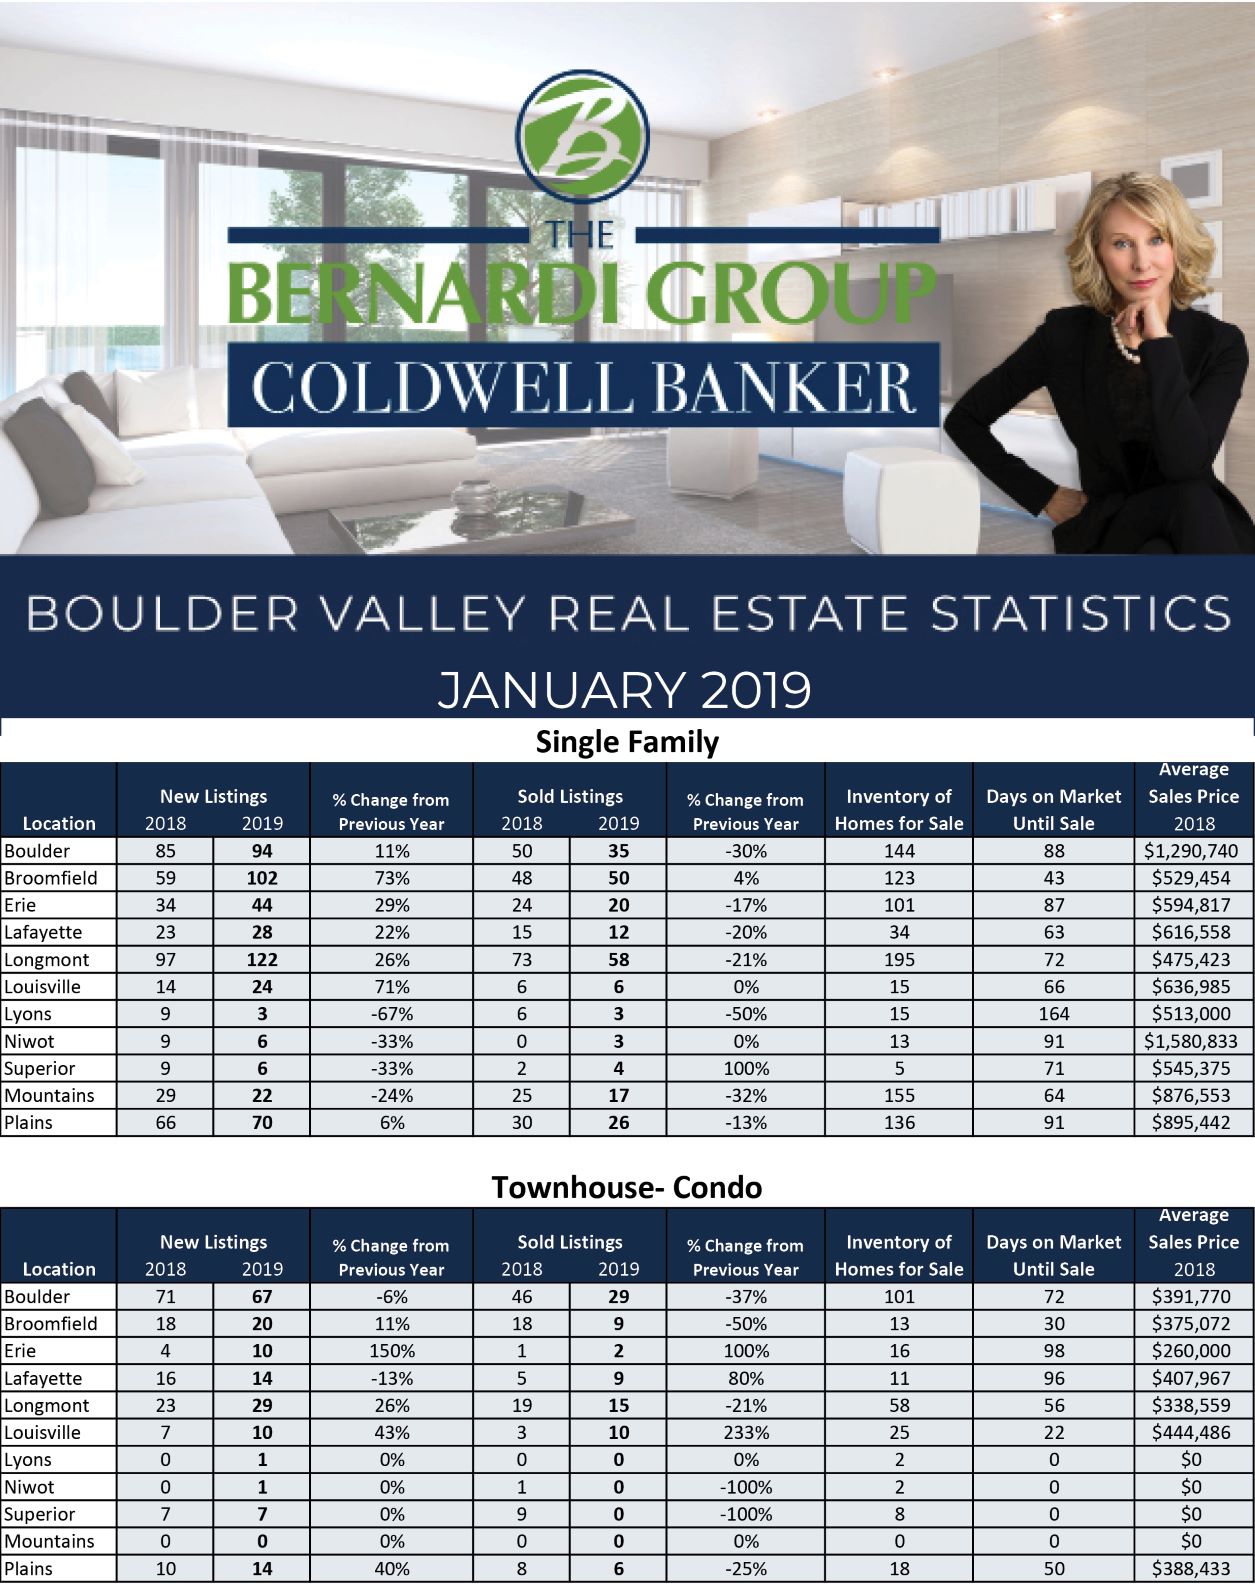 Real estate statistics for January 2019. Call us at 303.402.6000 if you'd like to learn more.